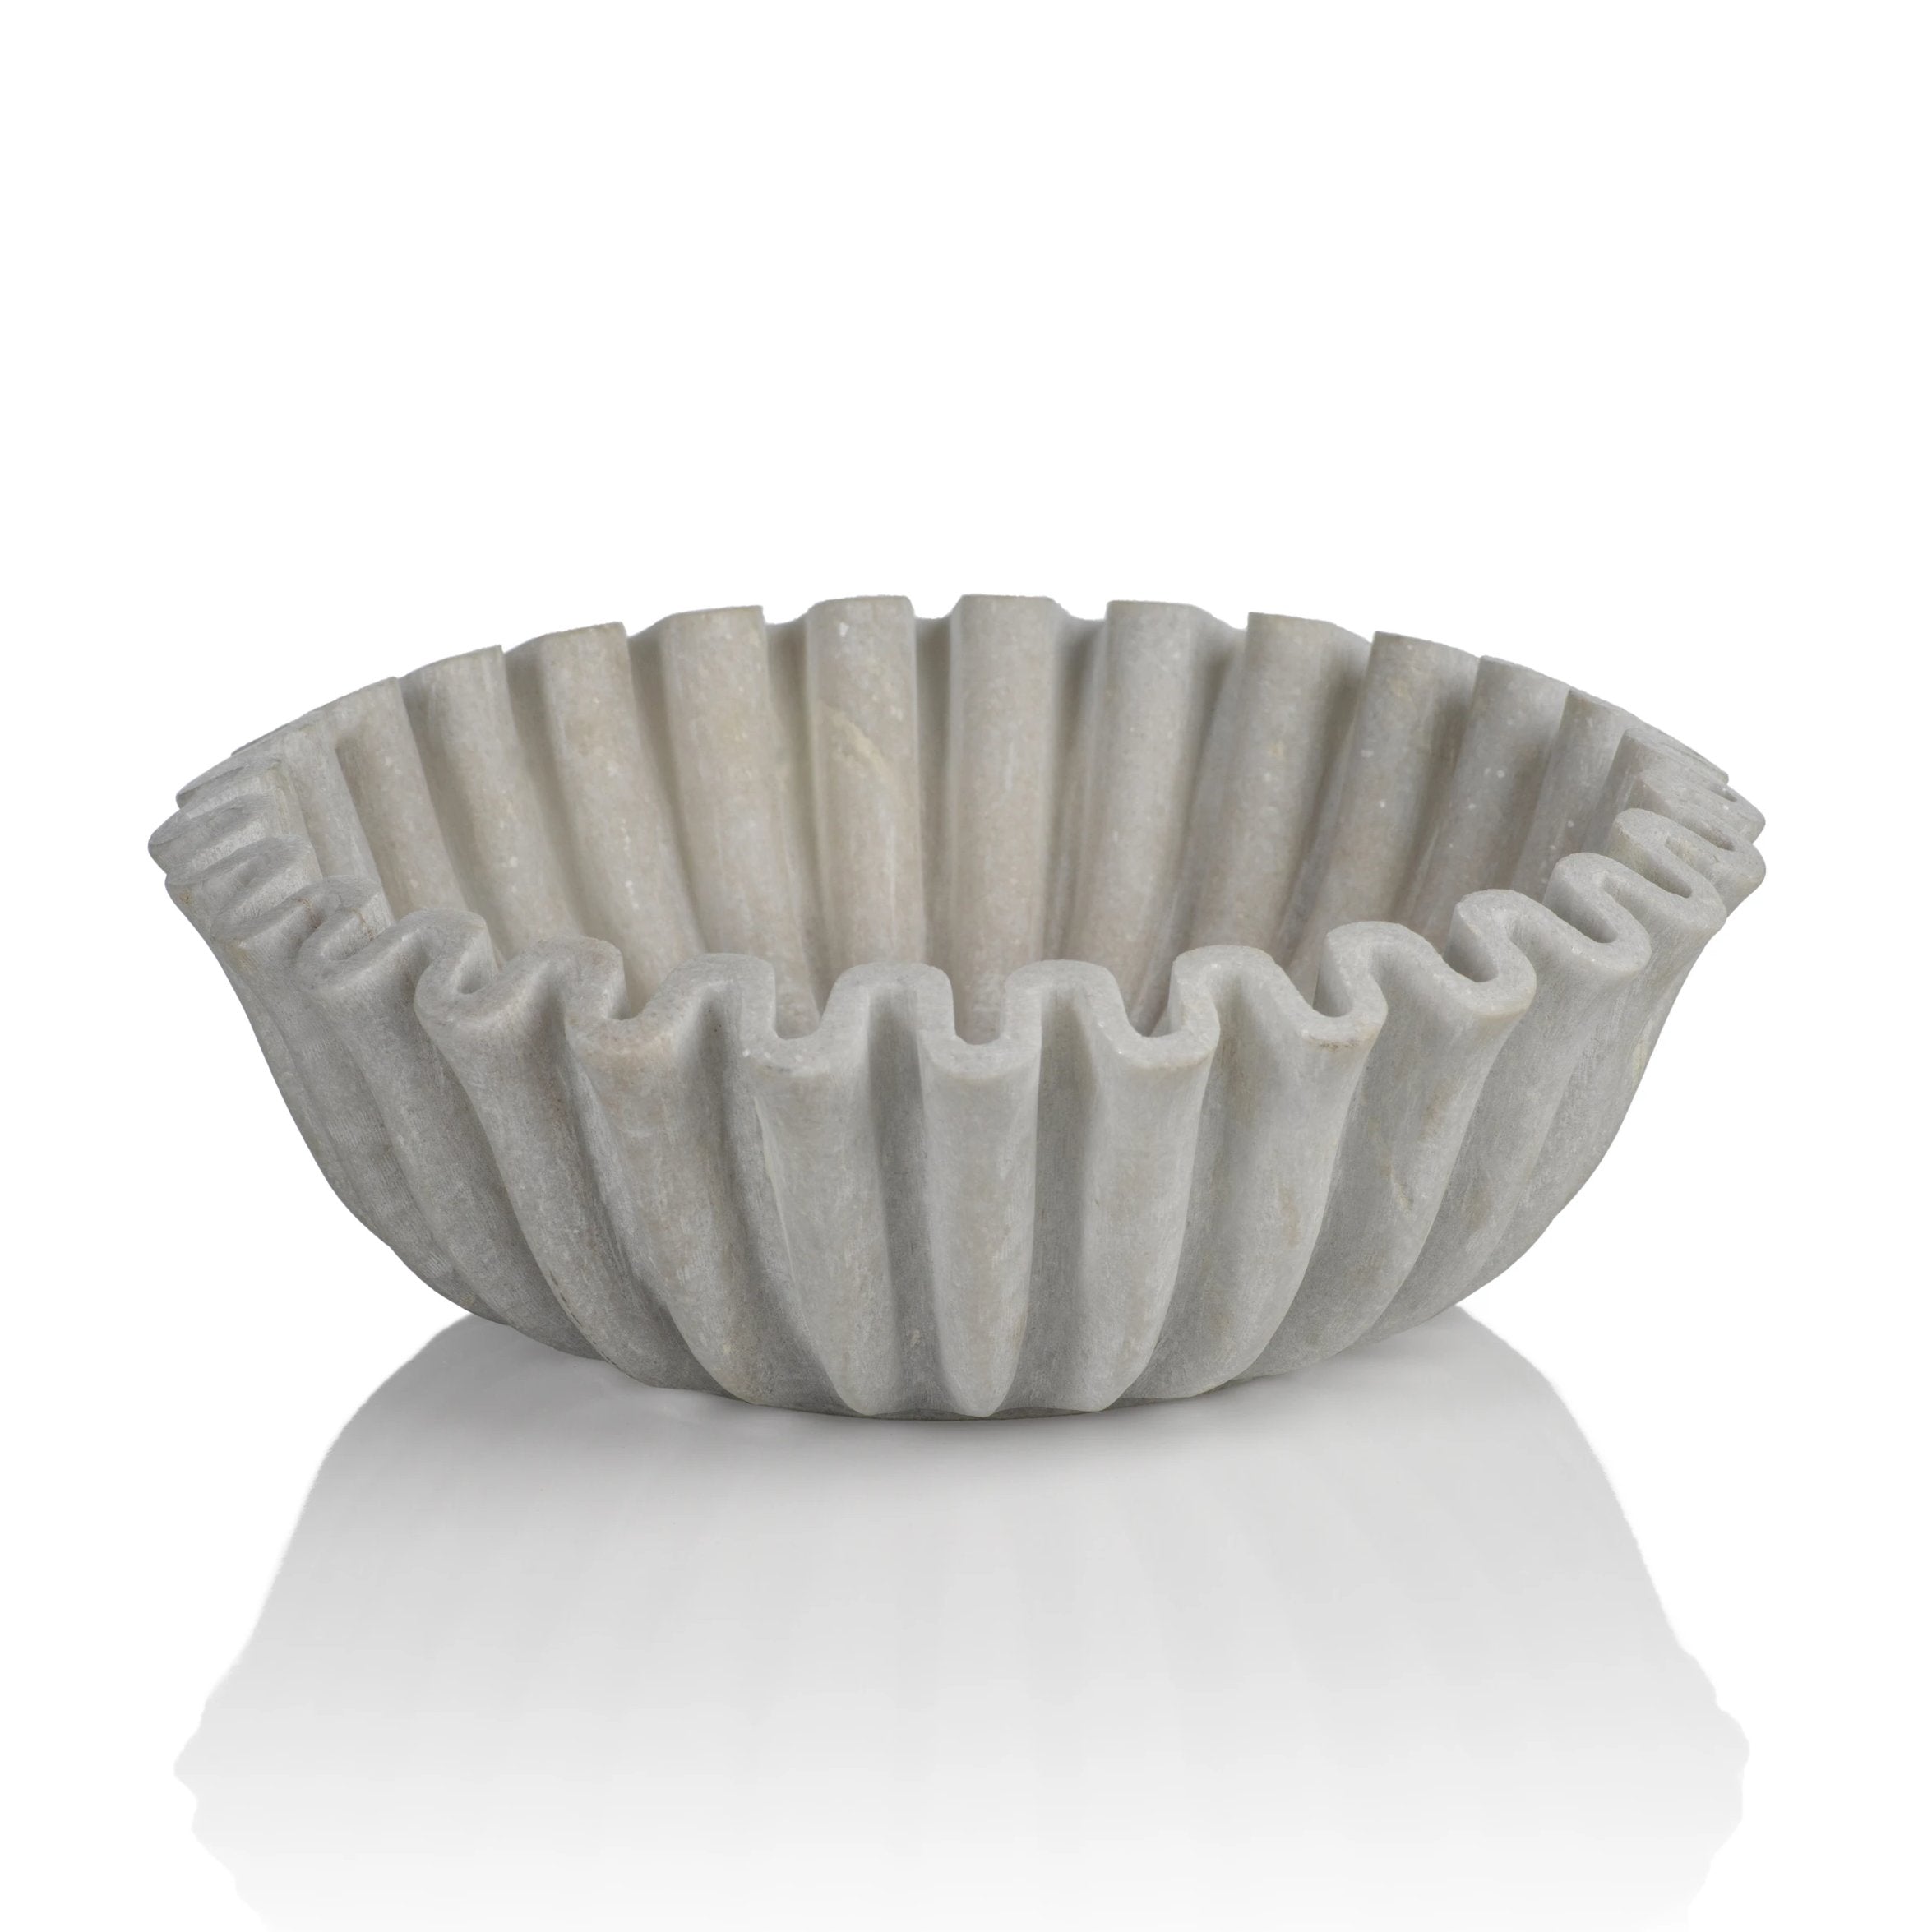 Scalloped Marble Bowl - CARLYLE AVENUE